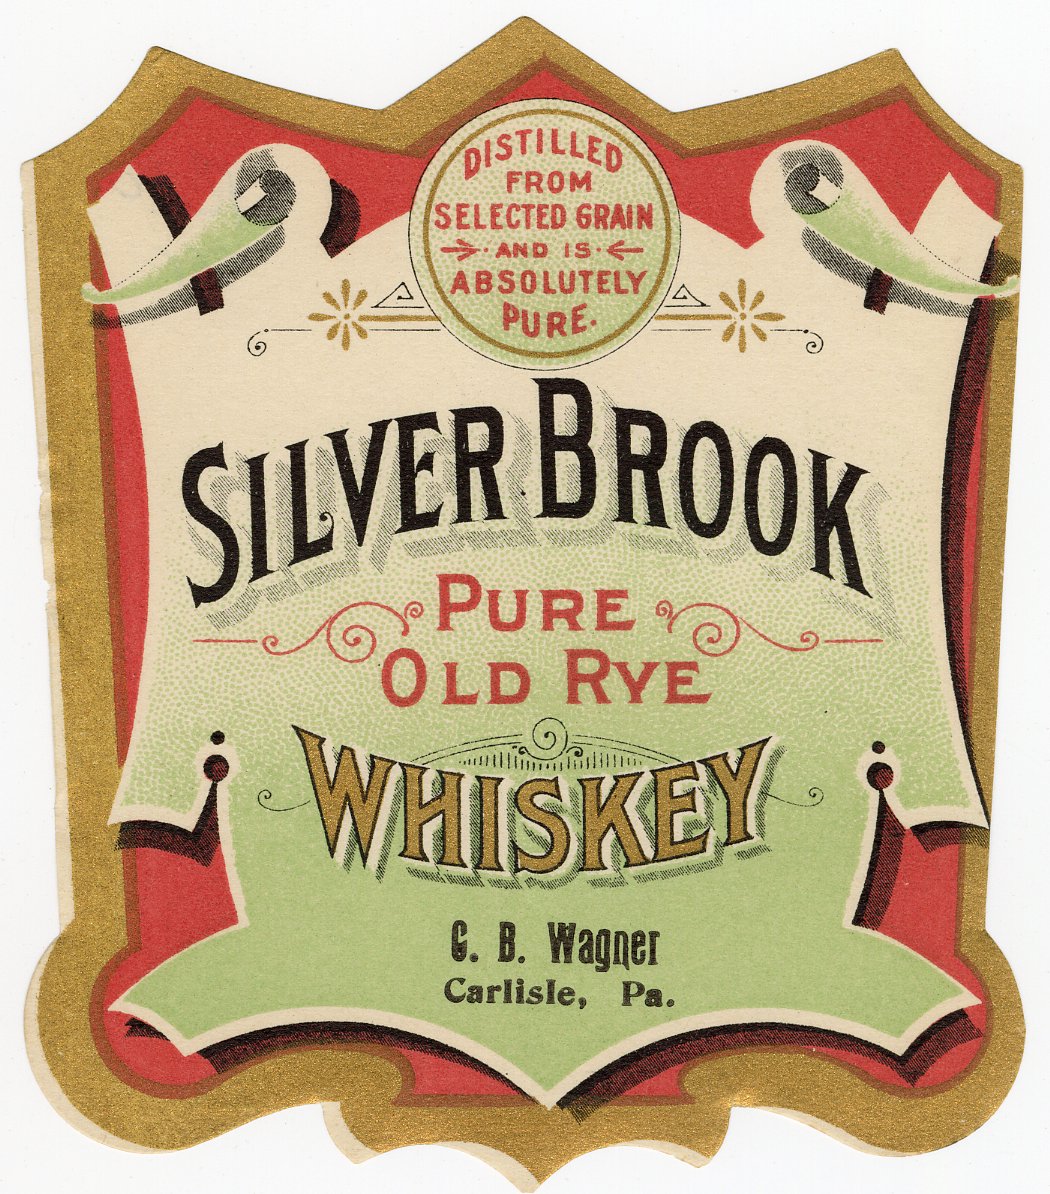 Set of Two SILVER BROOK Pure Old Rye WHISKEY Labels, C.B. Wagner, Alcohol, Vintage - TheBoxSF